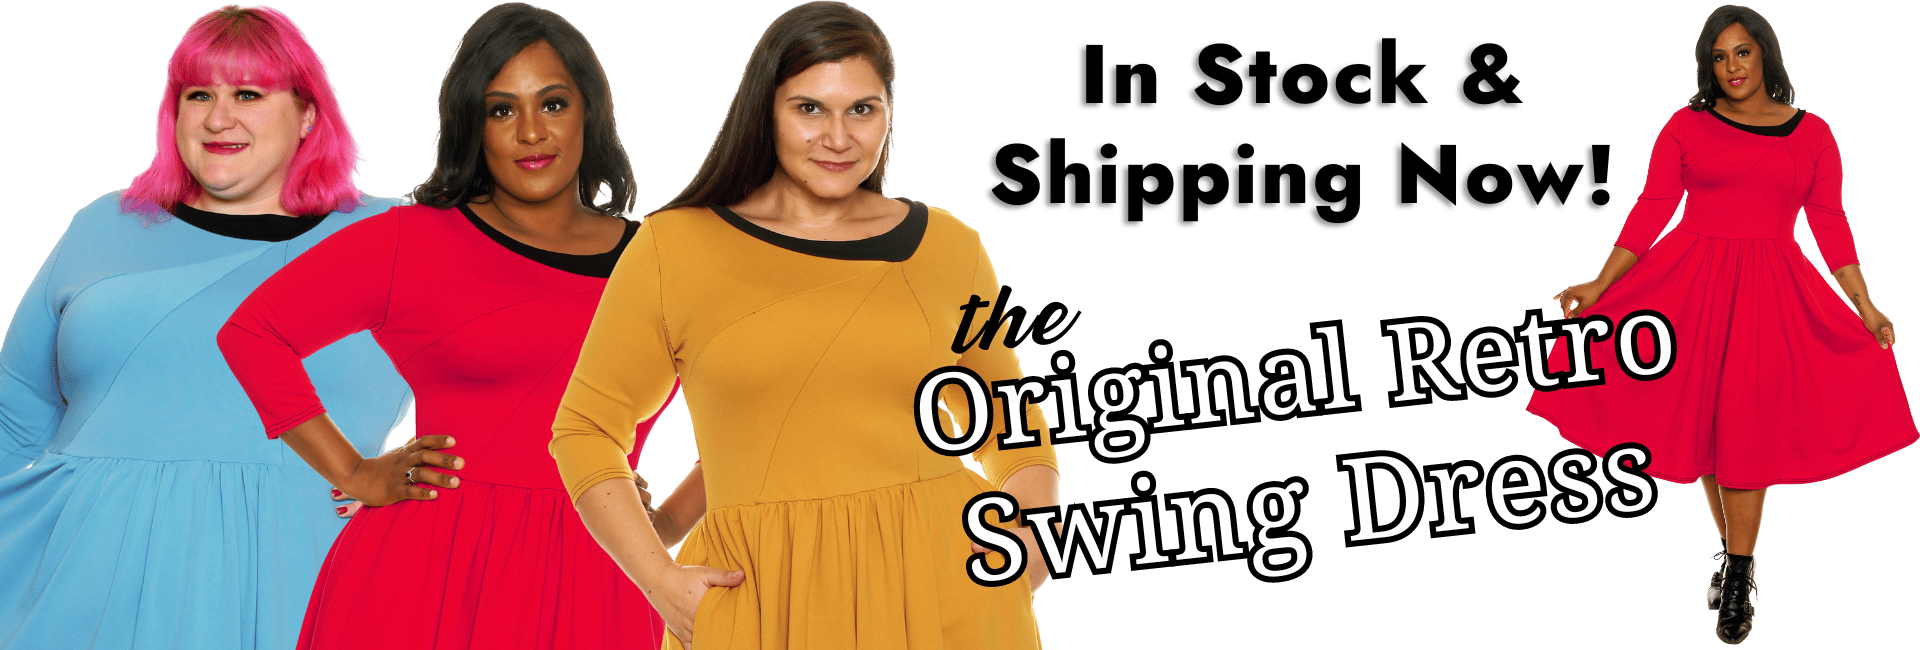 The Original Retro Swing Dress, In Stock And Shipping Now!